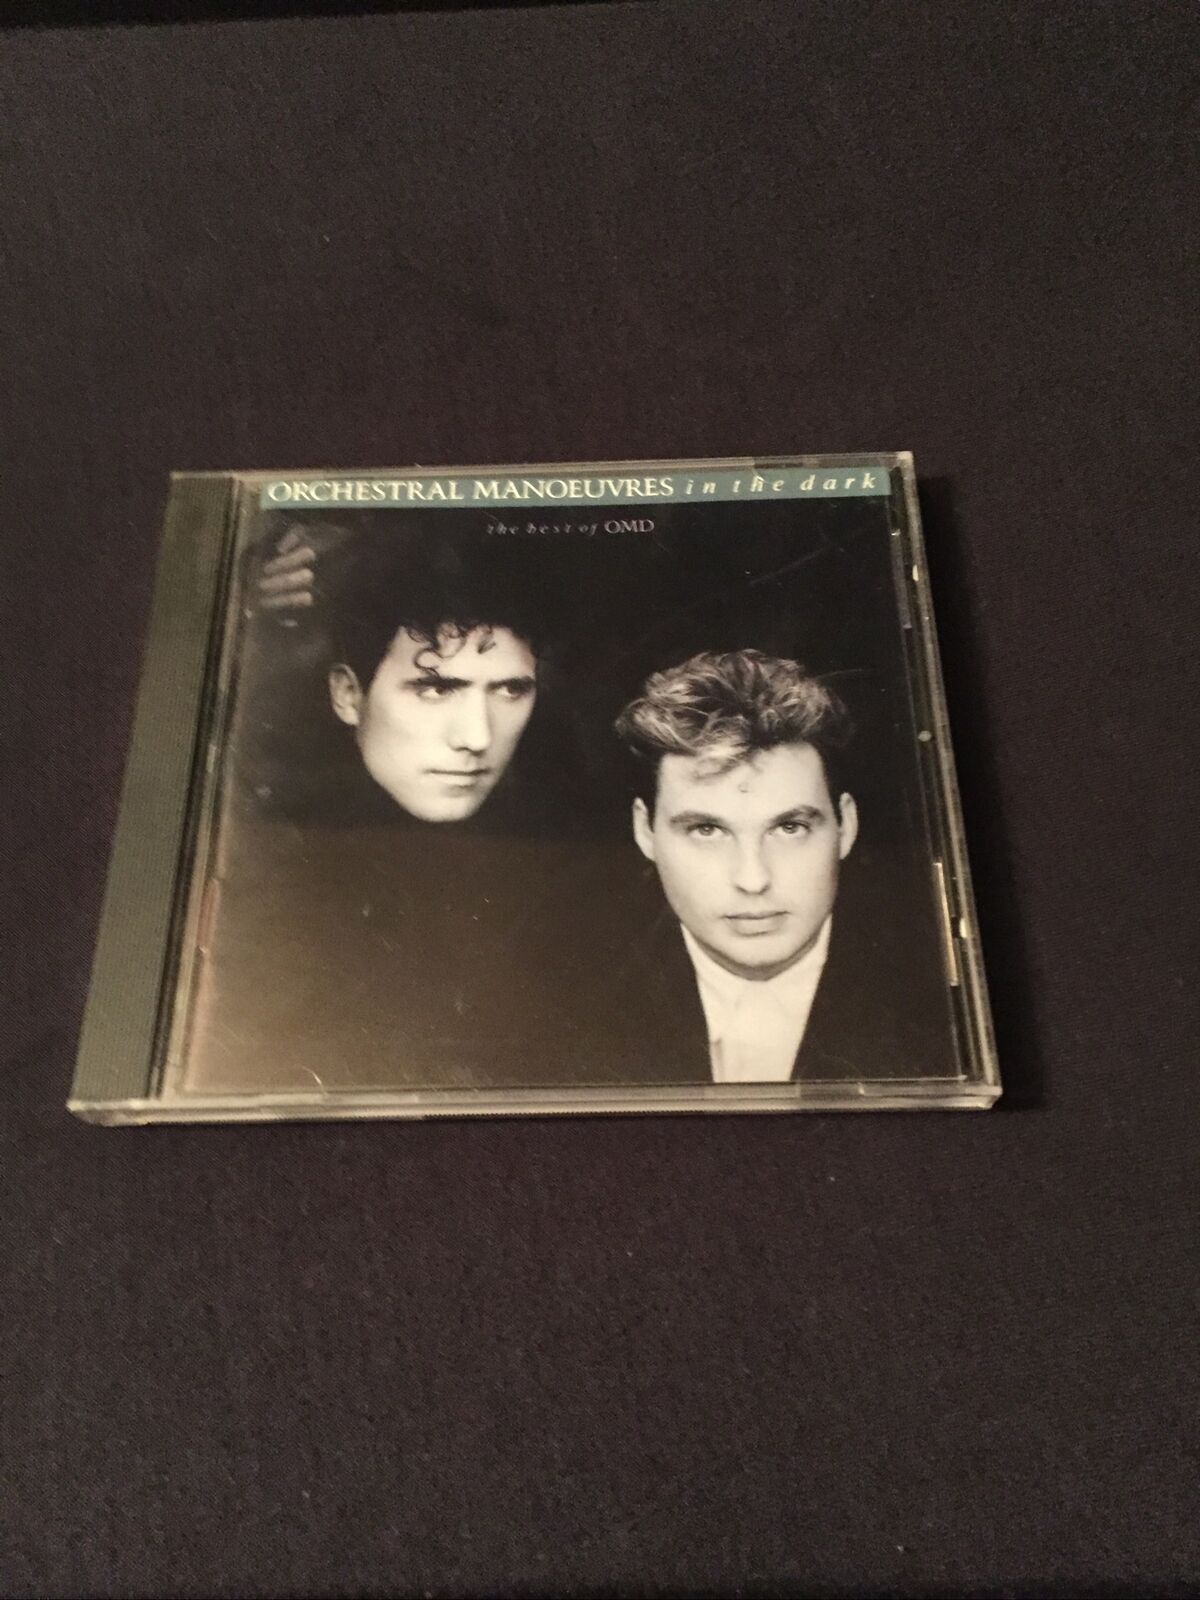 The Best of OMD - Orchestral Manoeuvres in the Dark - CD - 1988